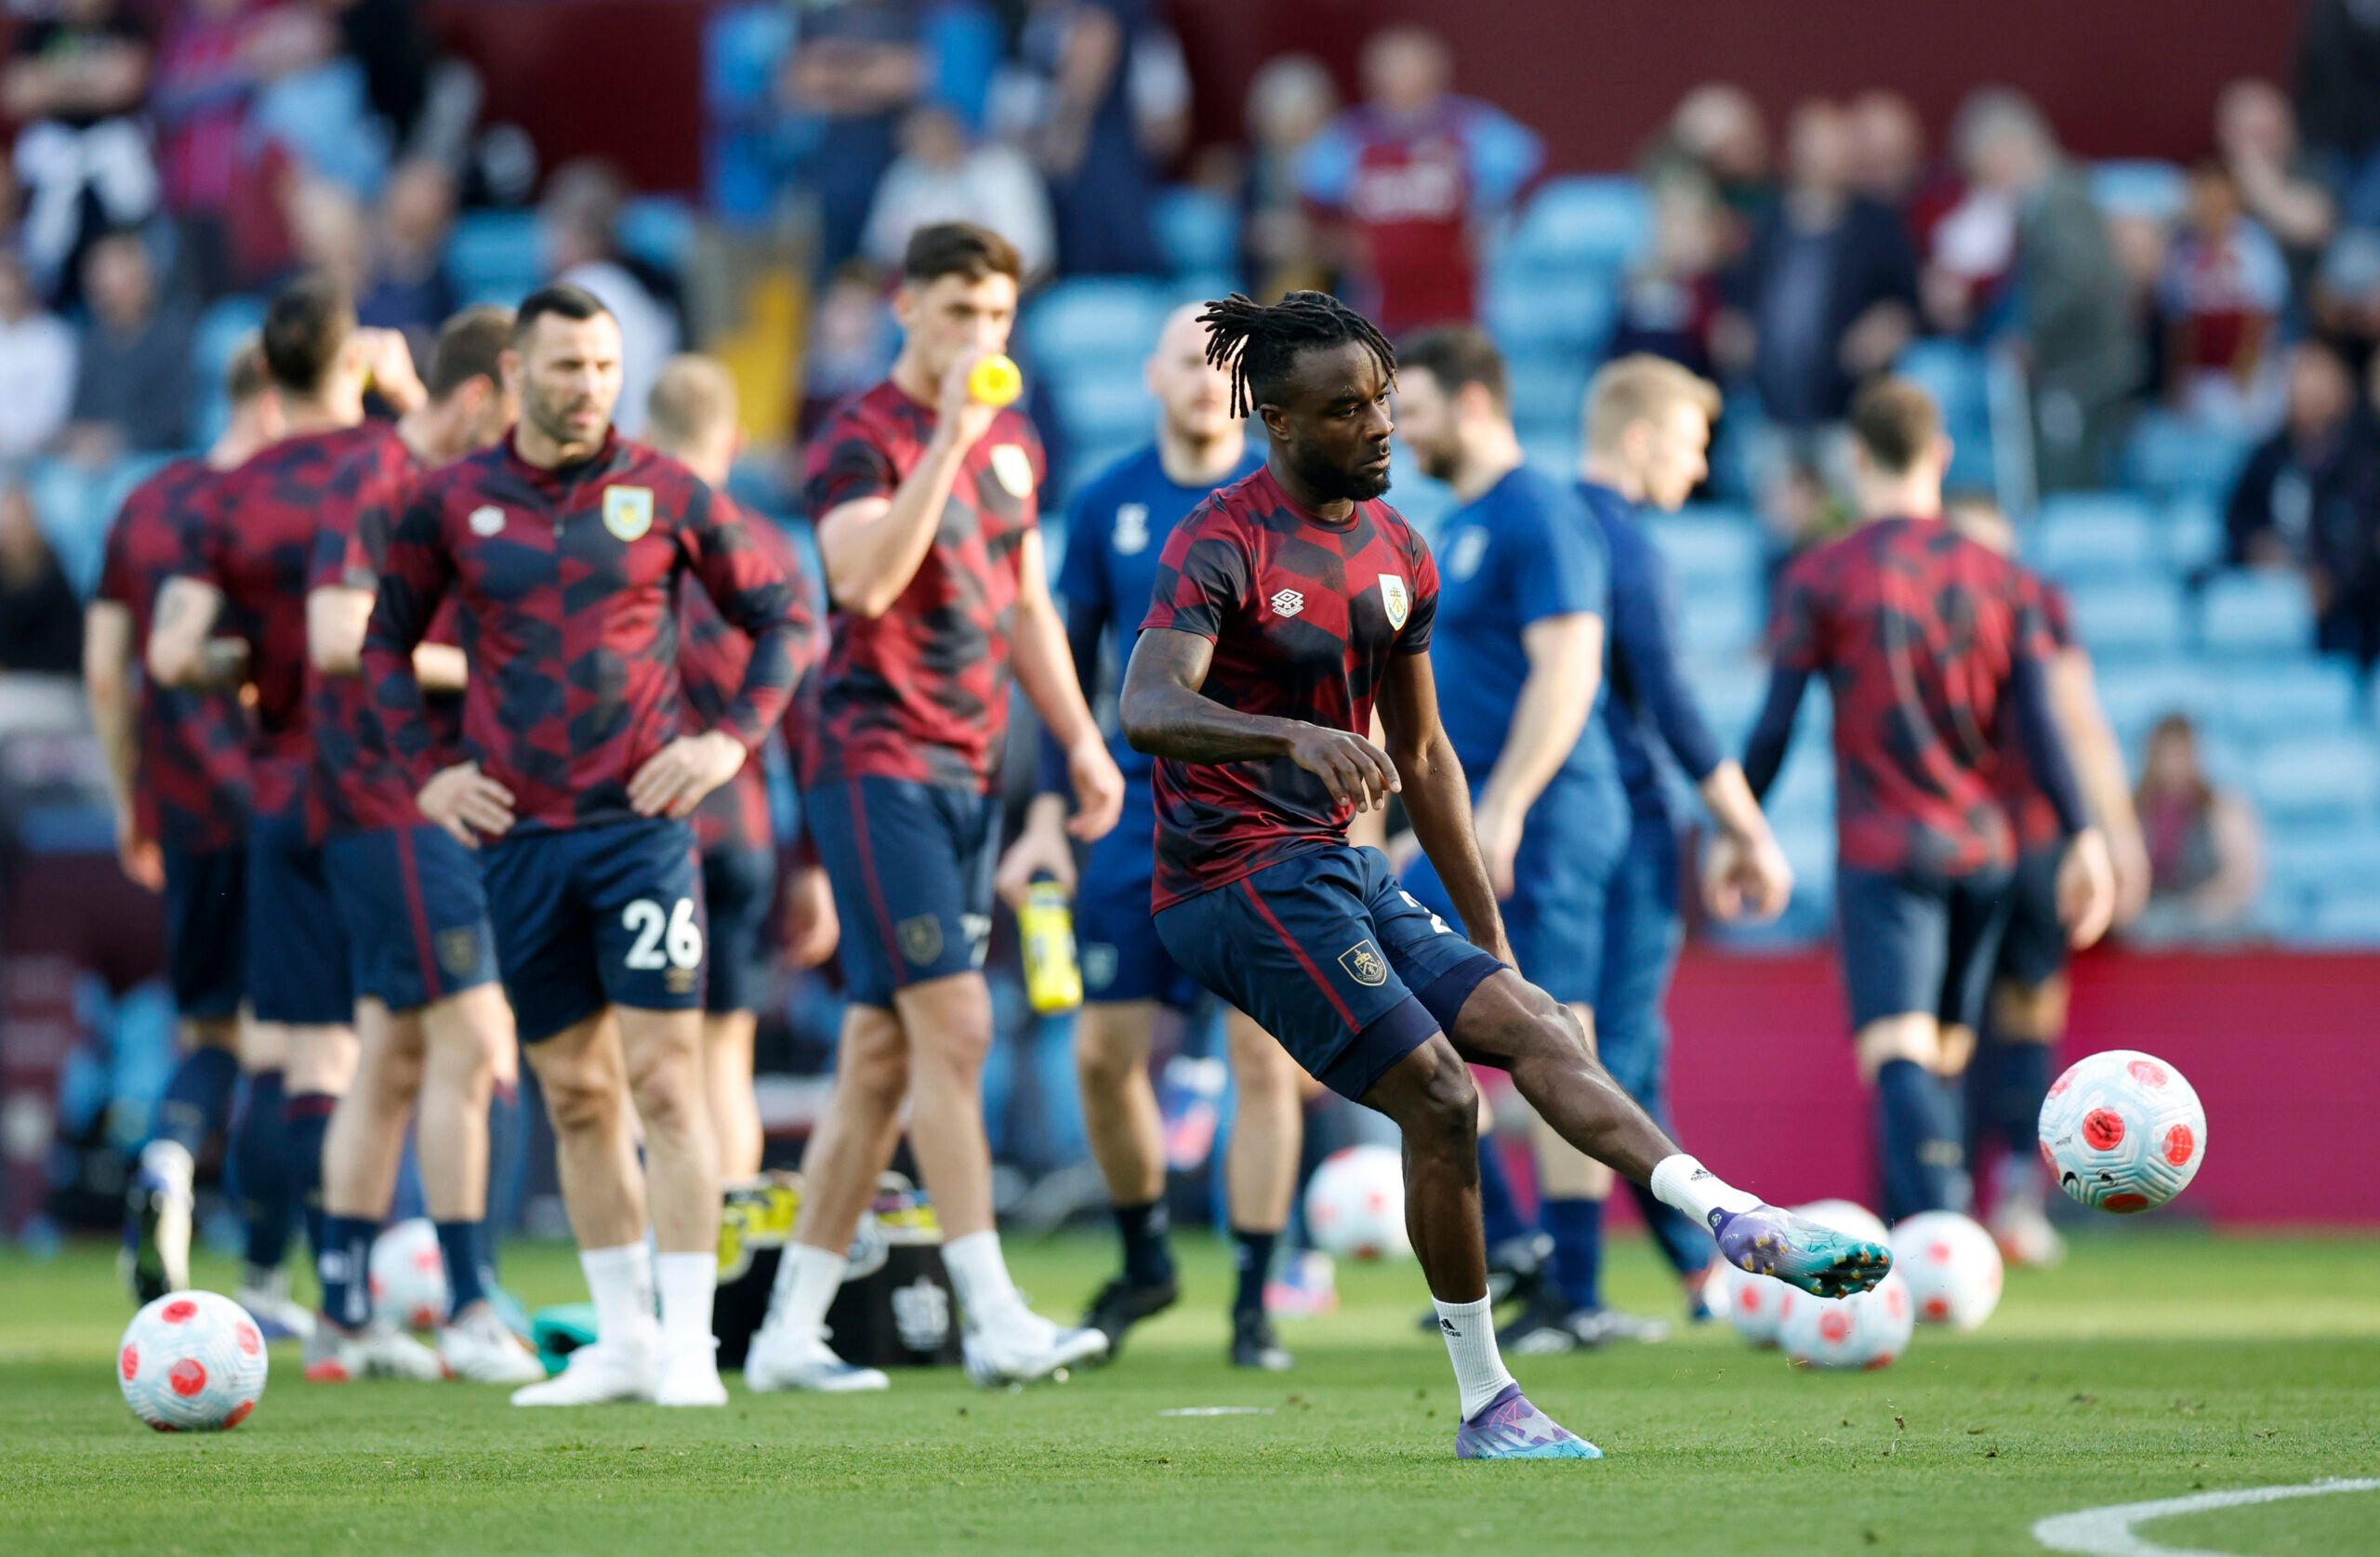 Soccer Football - Premier League - Aston Villa v Burnley - Villa Park, Birmingham, Britain - May 19, 2022 Burnley's Maxwel Cornet with teammates during the warm up before the match Action Images via Reuters/Peter Cziborra EDITORIAL USE ONLY. No use with unauthorized audio, video, data, fixture lists, club/league logos or 'live' services. Online in-match use limited to 75 images, no video emulation. No use in betting, games or single club /league/player publications.  Please contact your account 